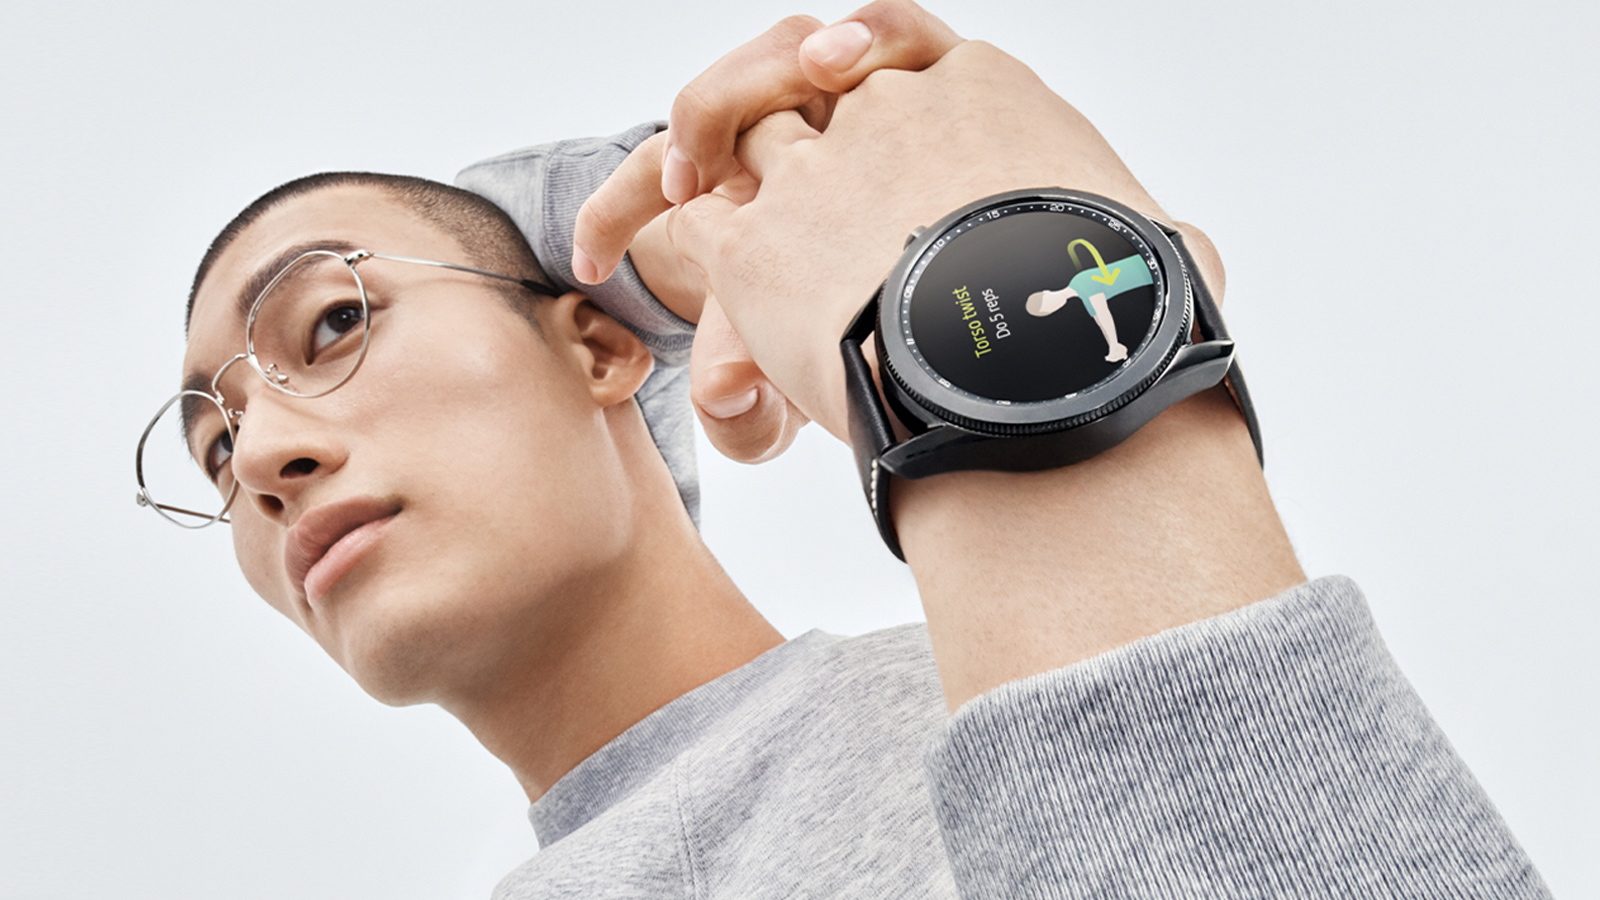 Customize Your Samsung Galaxy Watch3 By Choosing From Over 50,000 Watch